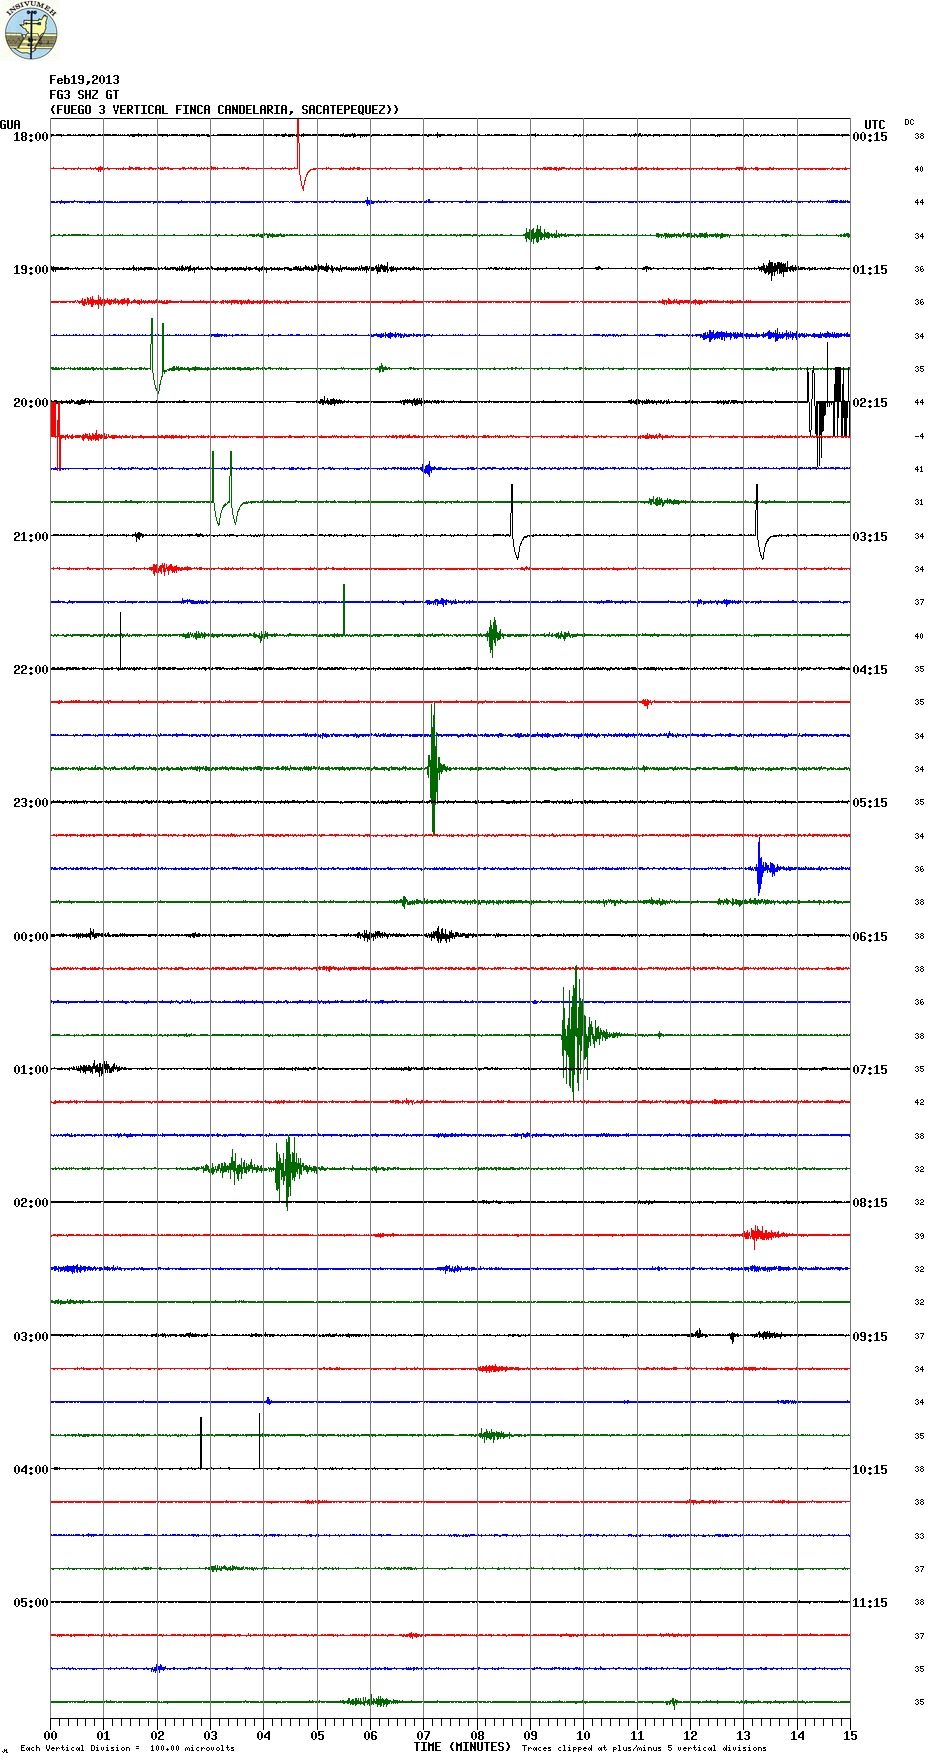 Today's seismic signal from Fuego (FG3 station, INSIVUMEH)